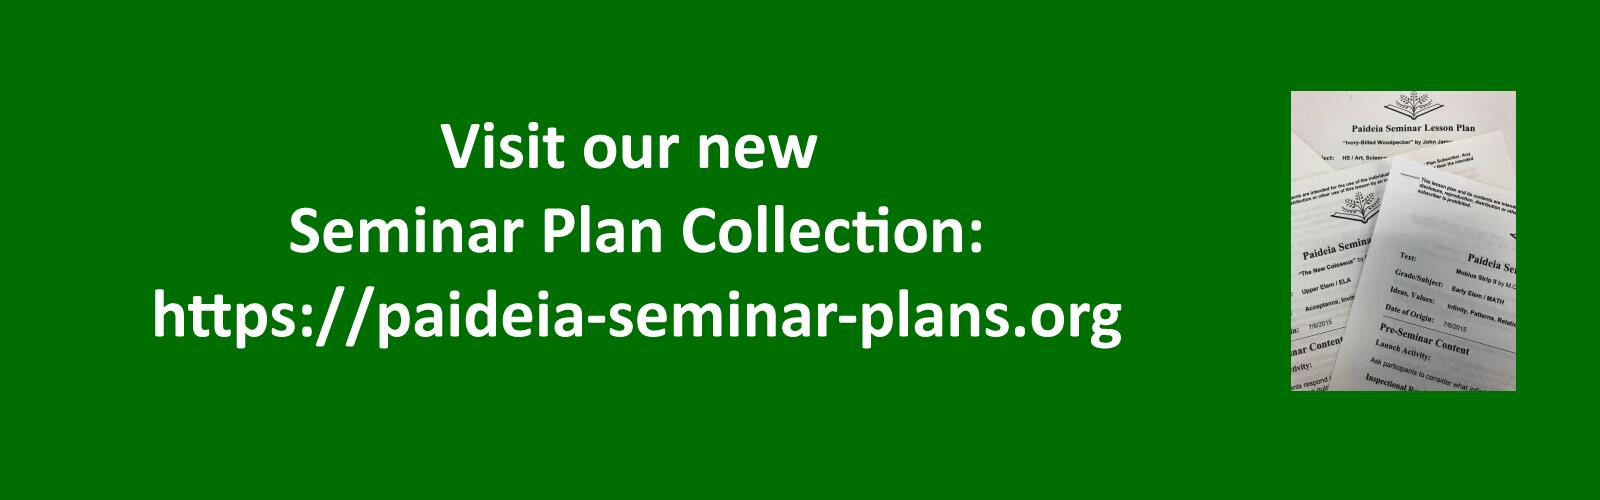 Visit our new Seminar Plan Collection